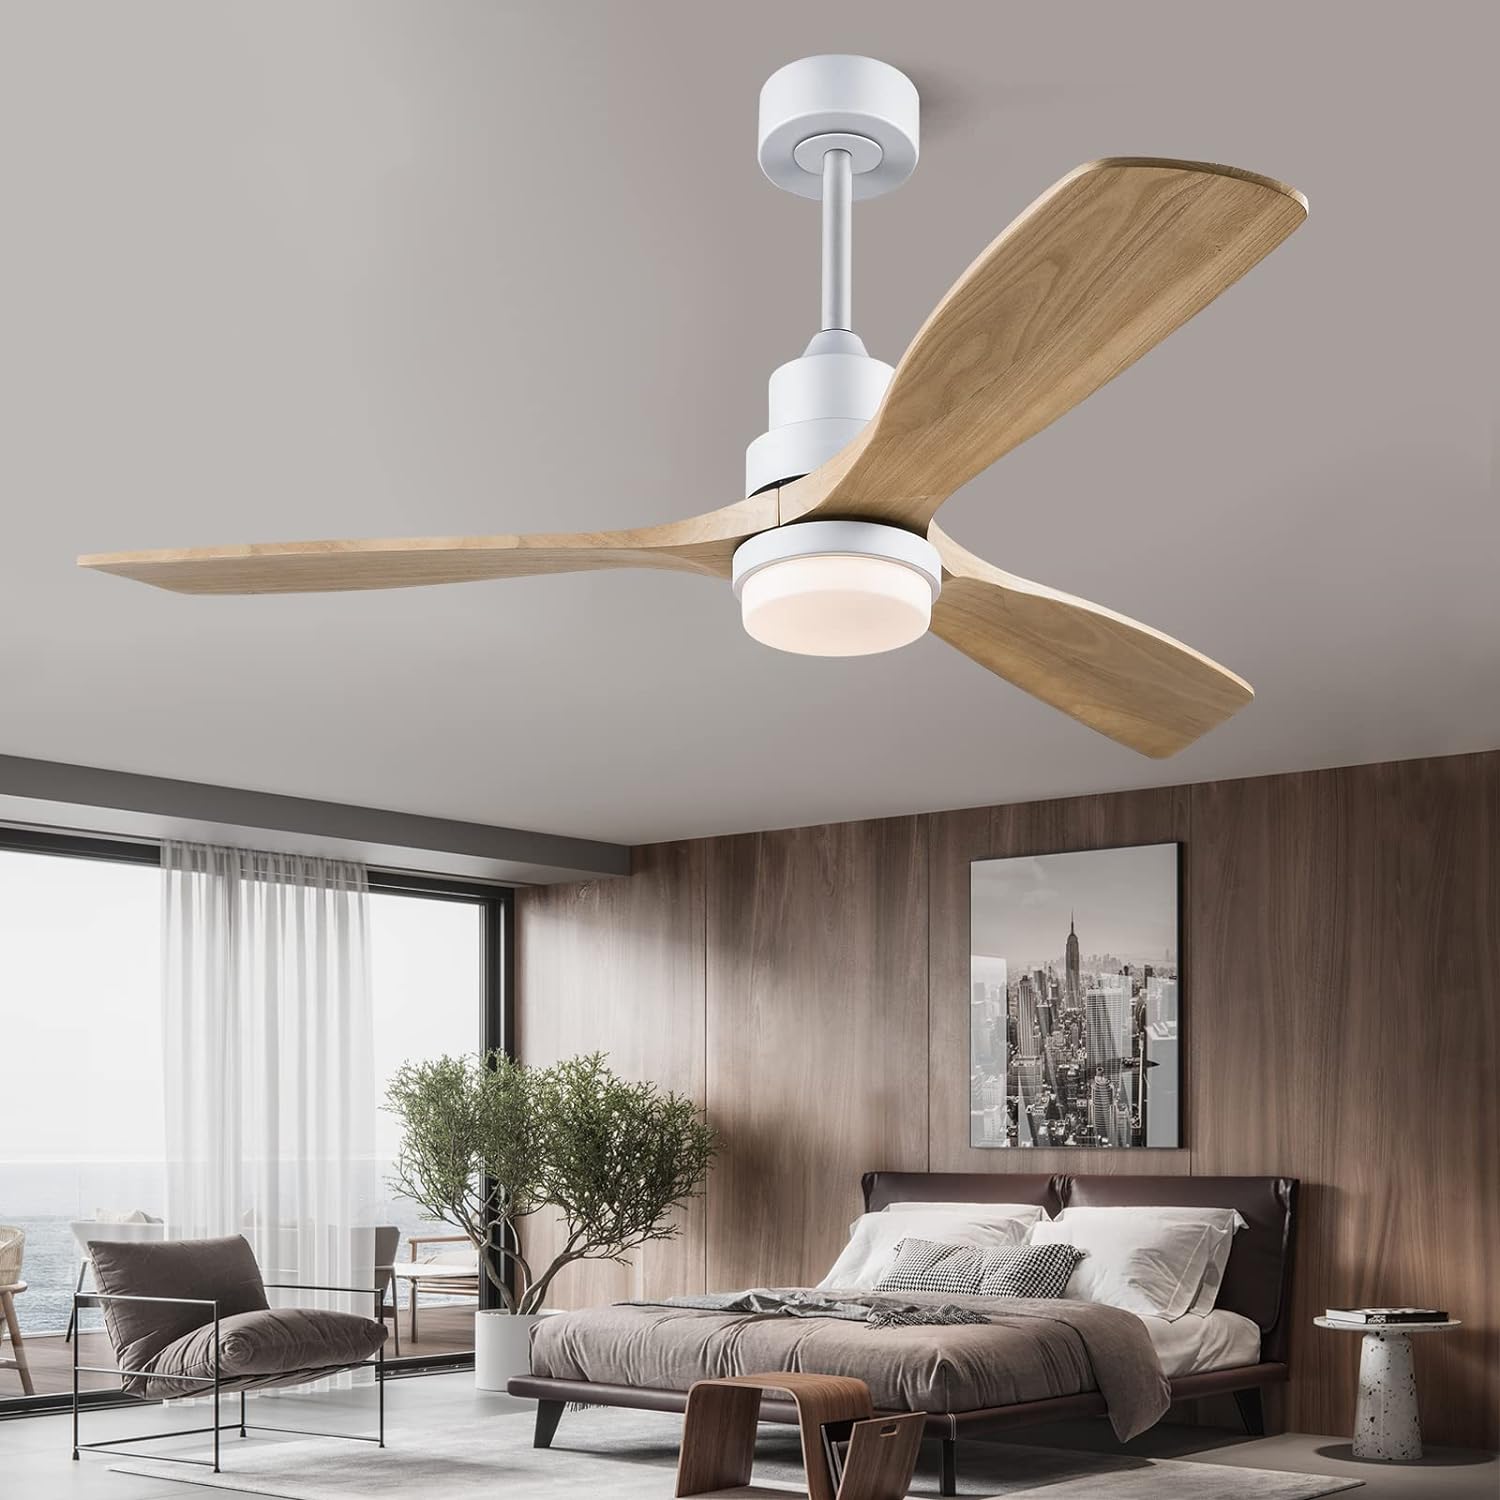 BOJUE 60 Ceiling Fans with Light Remote Control,Indoor Outdoor Wood Ceiling with 3 Blade Fan for Patio, Living Room, Bedroom, Office, Summer House